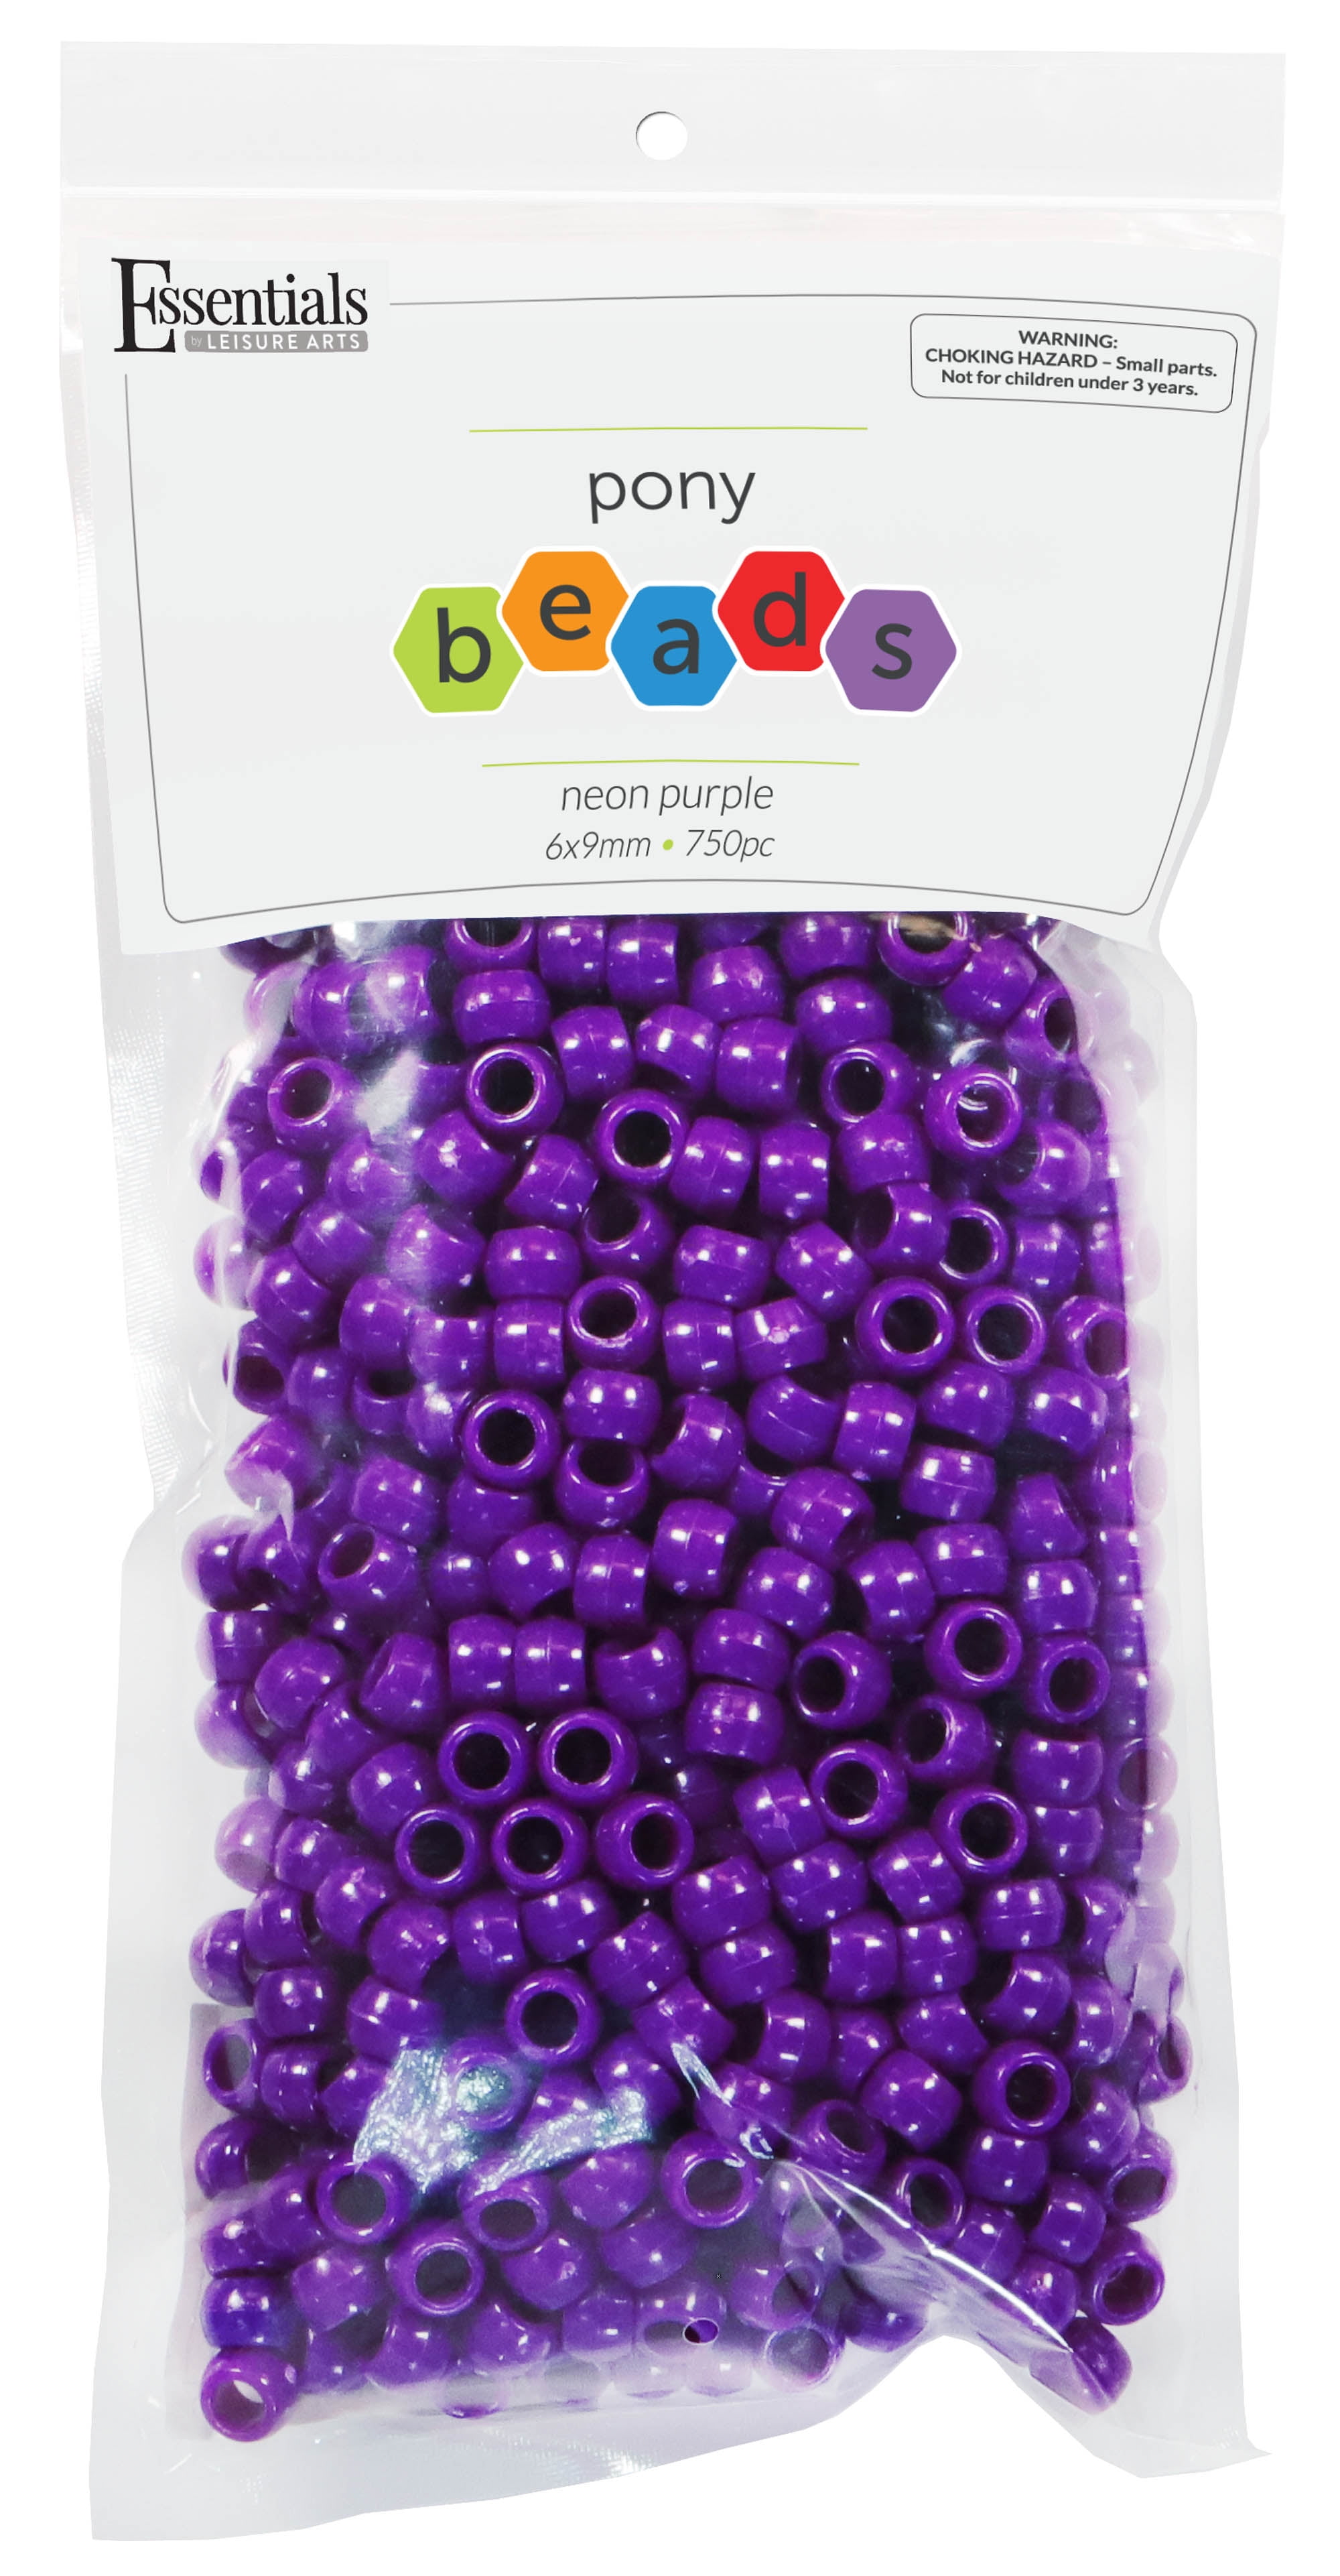 Essentials by Leisure Arts Pony Bead 6mm x 9mm Purple Opaque